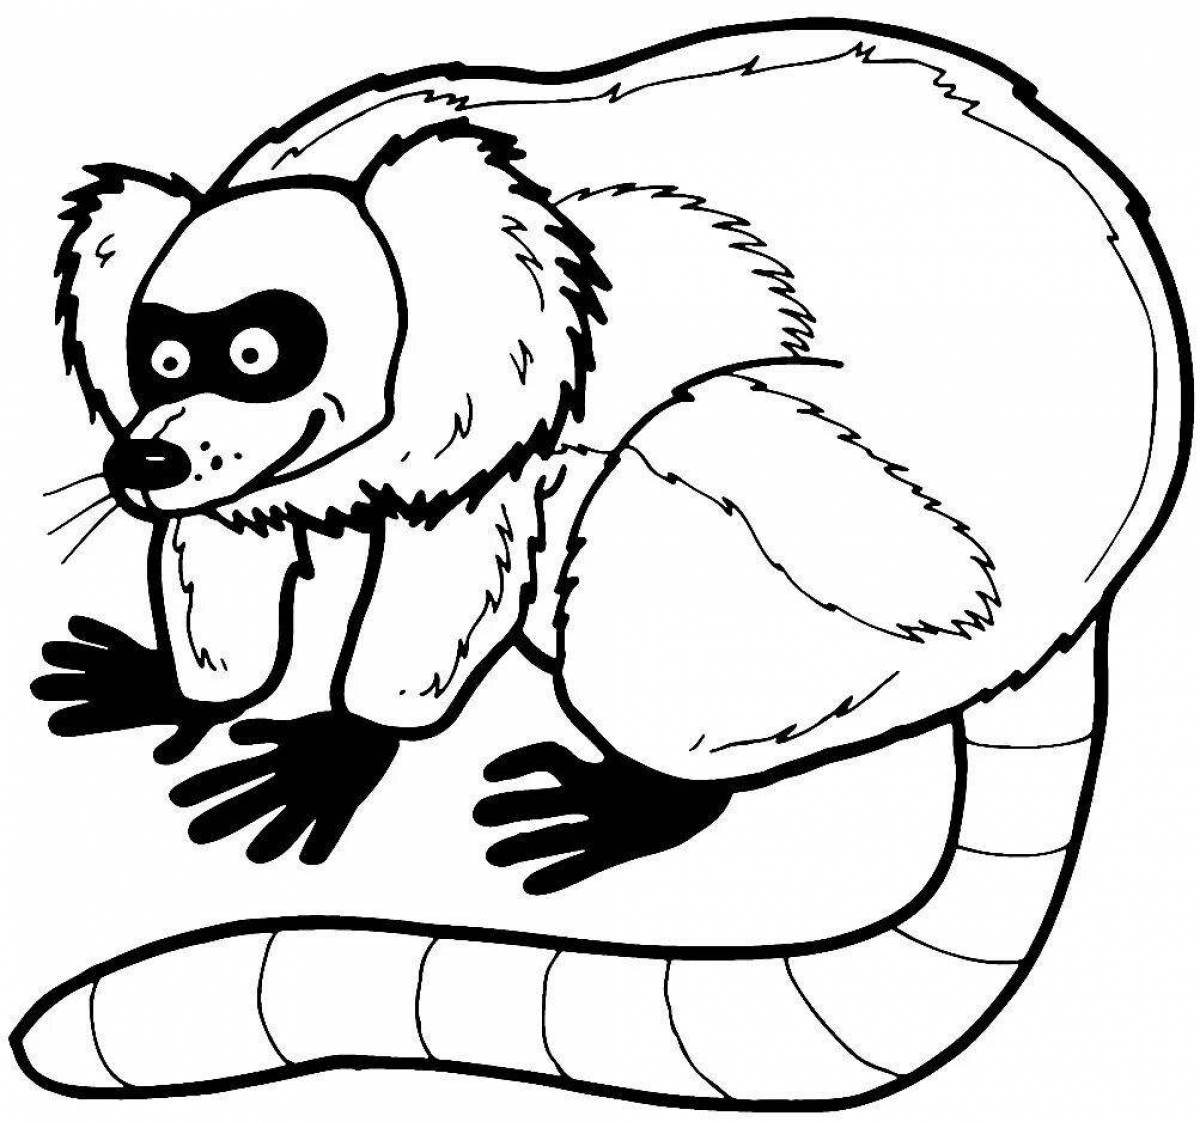 Coloring page cheerful lemur